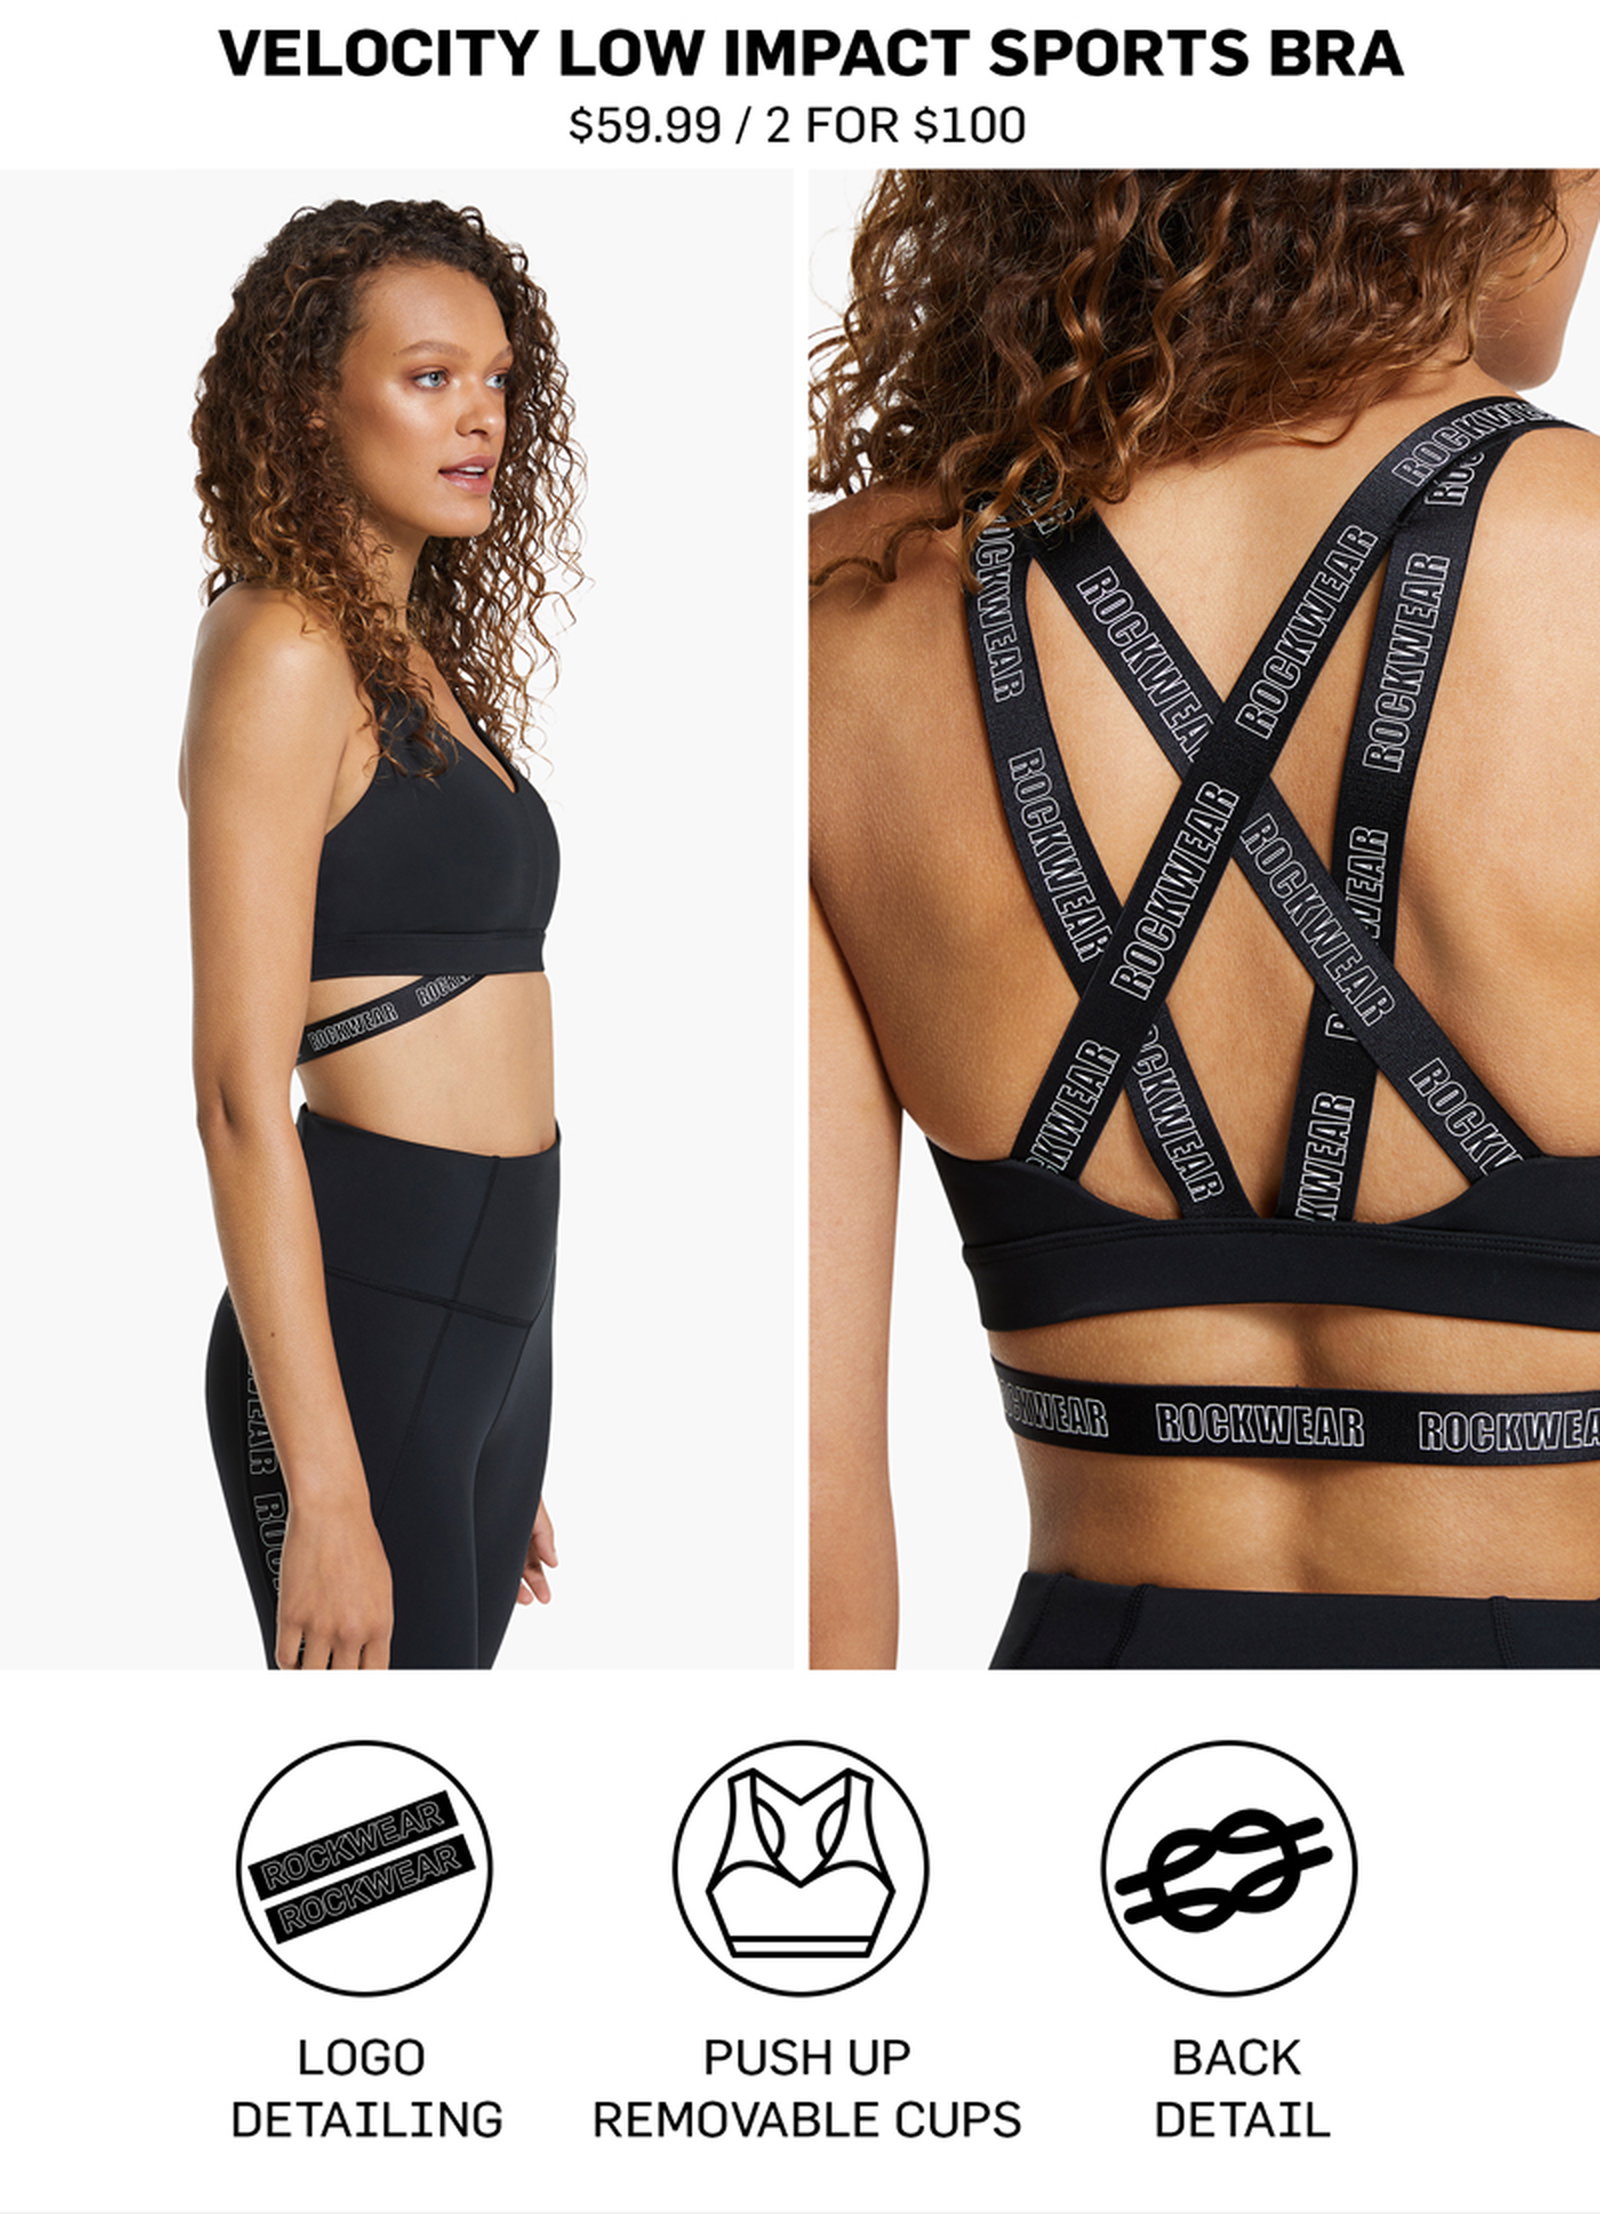 Rock Wear: Sports Bras Made to Support 🤸‍♀️ 2 FOR $100